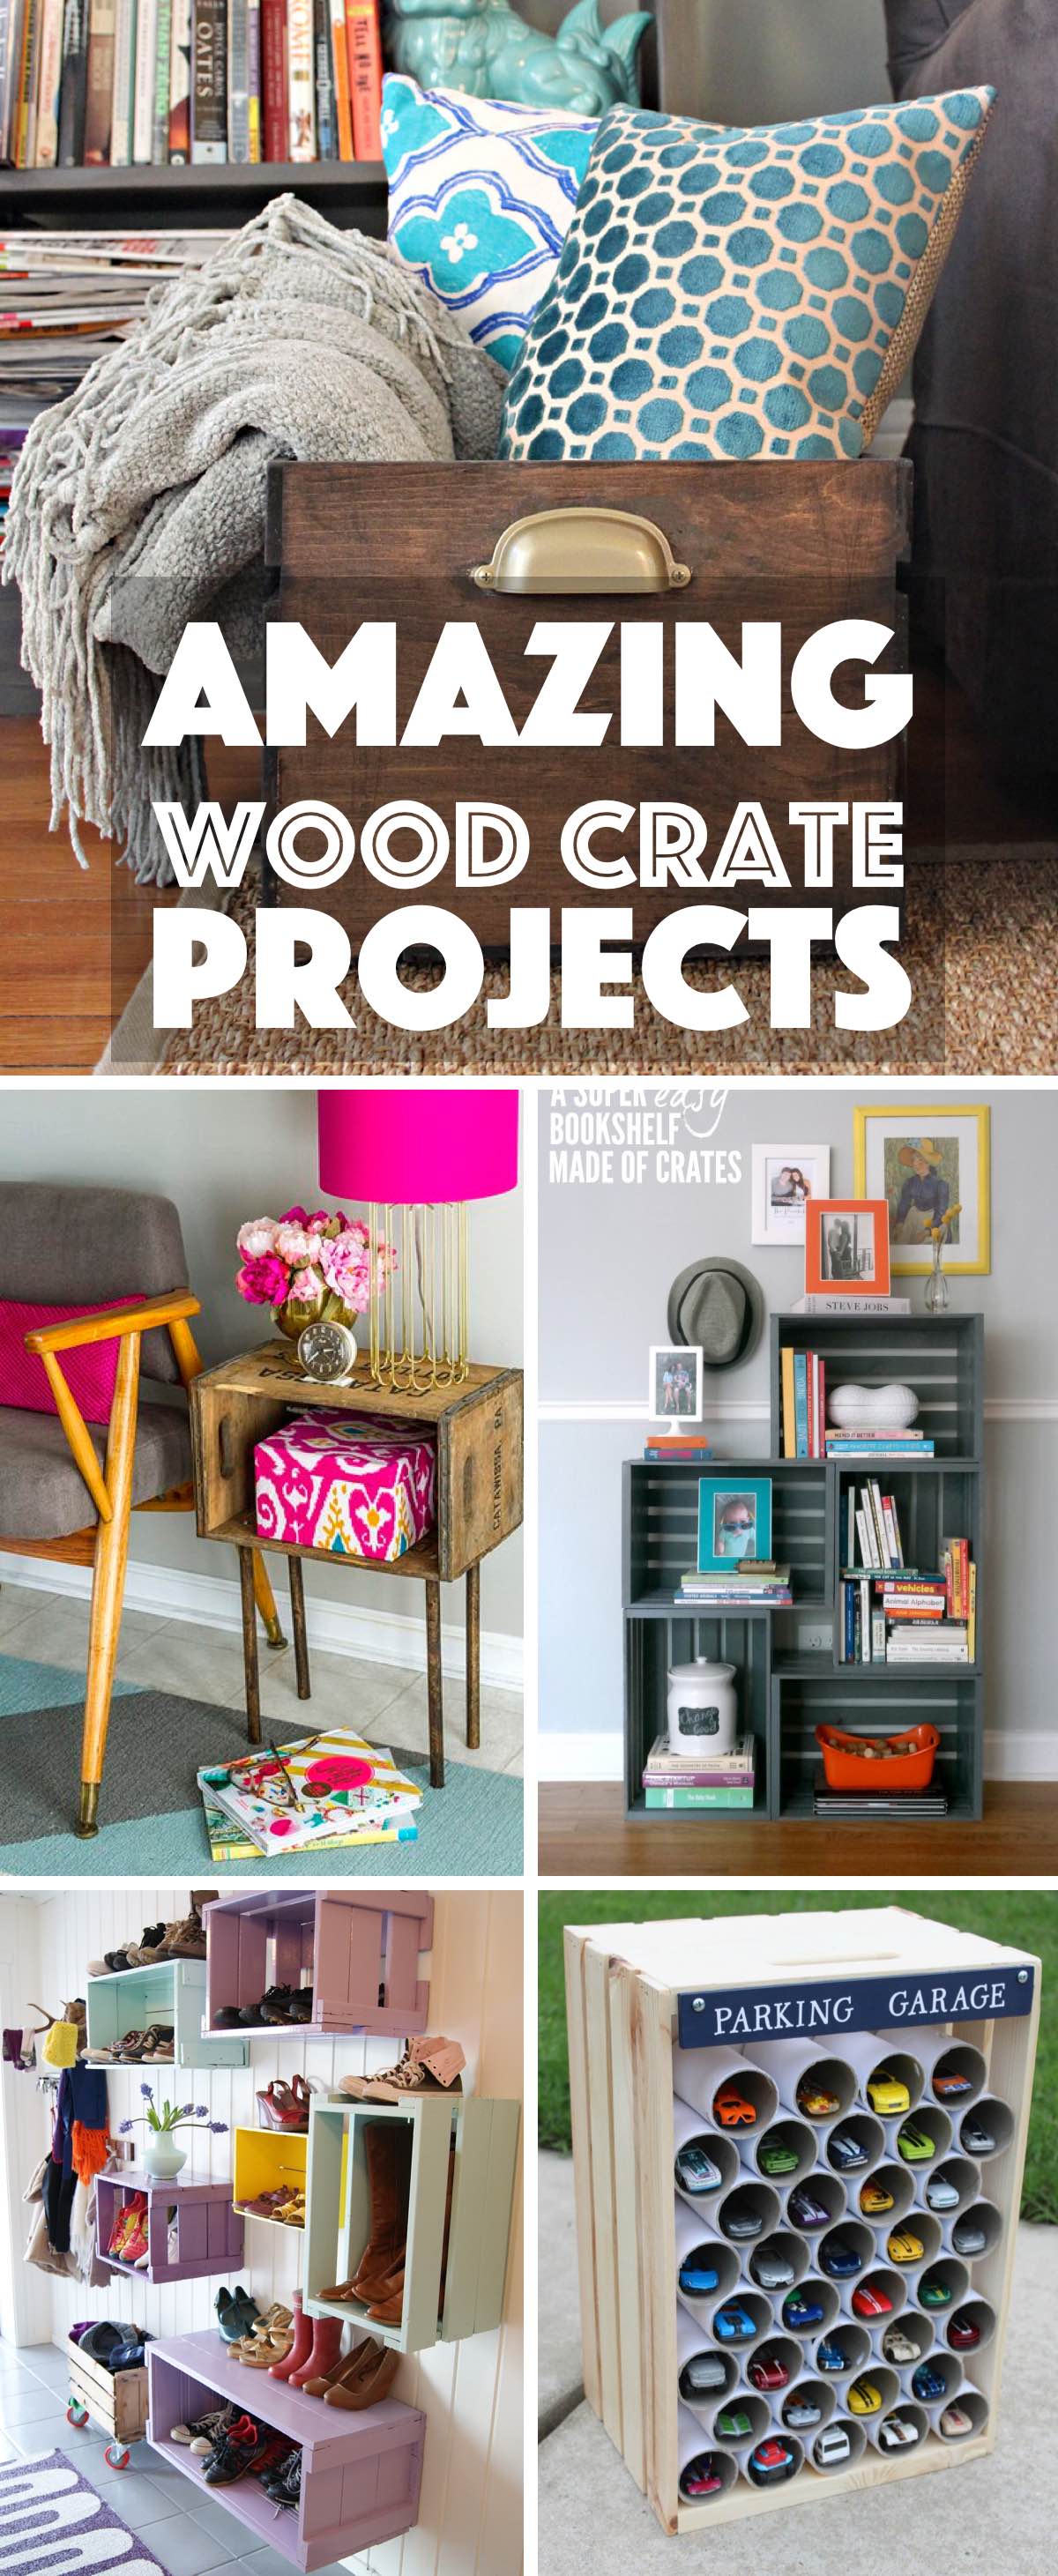 Amazing Wood Crate Projects